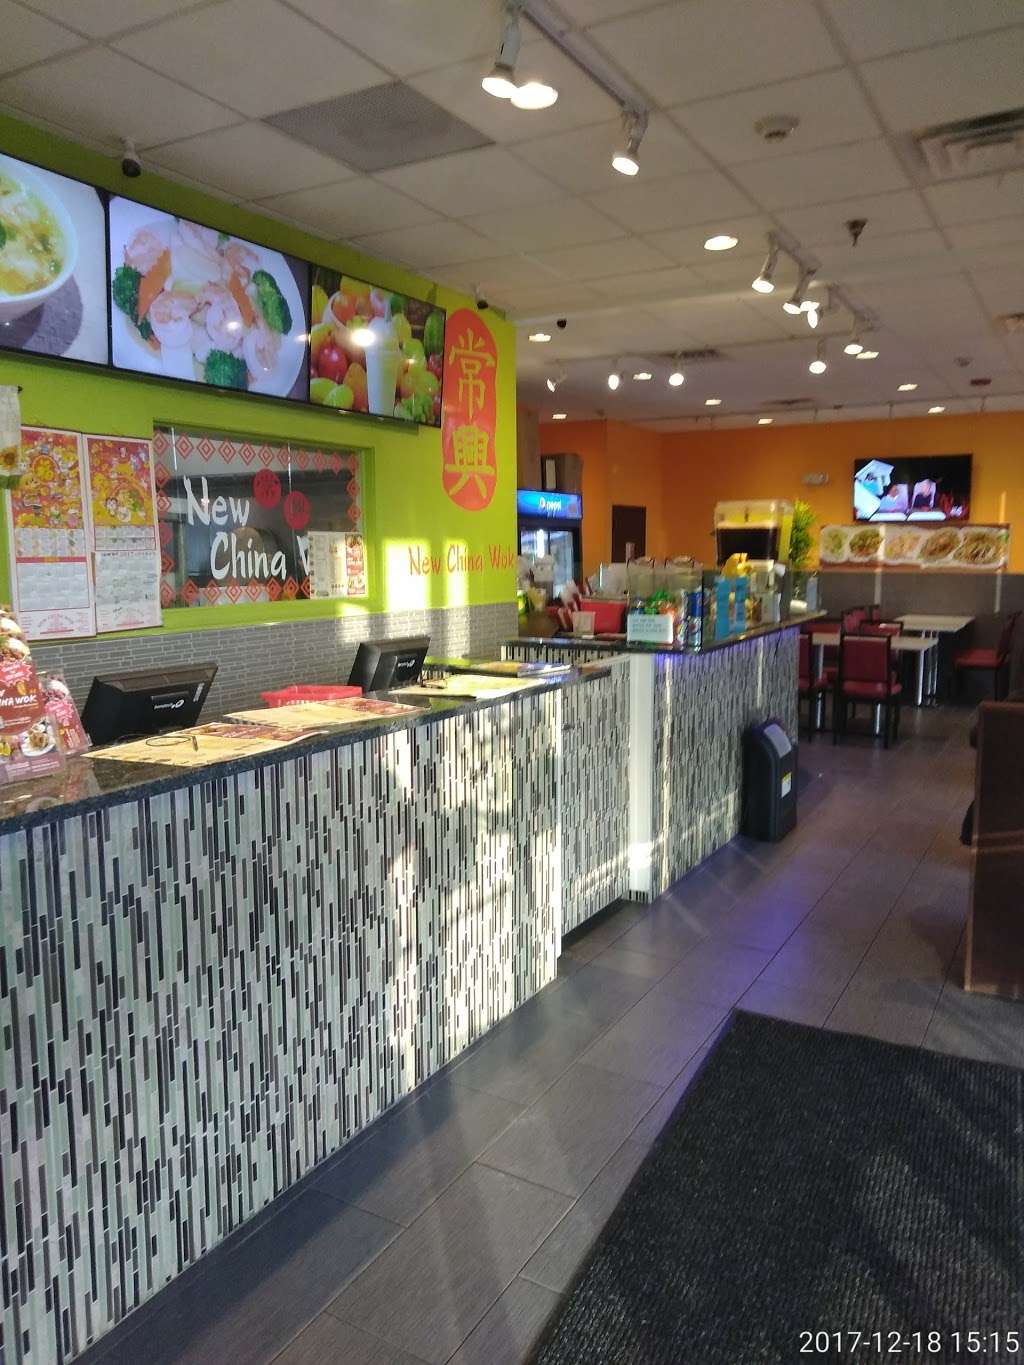 New China Wok | 9906 Roosevelt Rd, Westchester, IL 60154 | Phone: (708) 338-2398